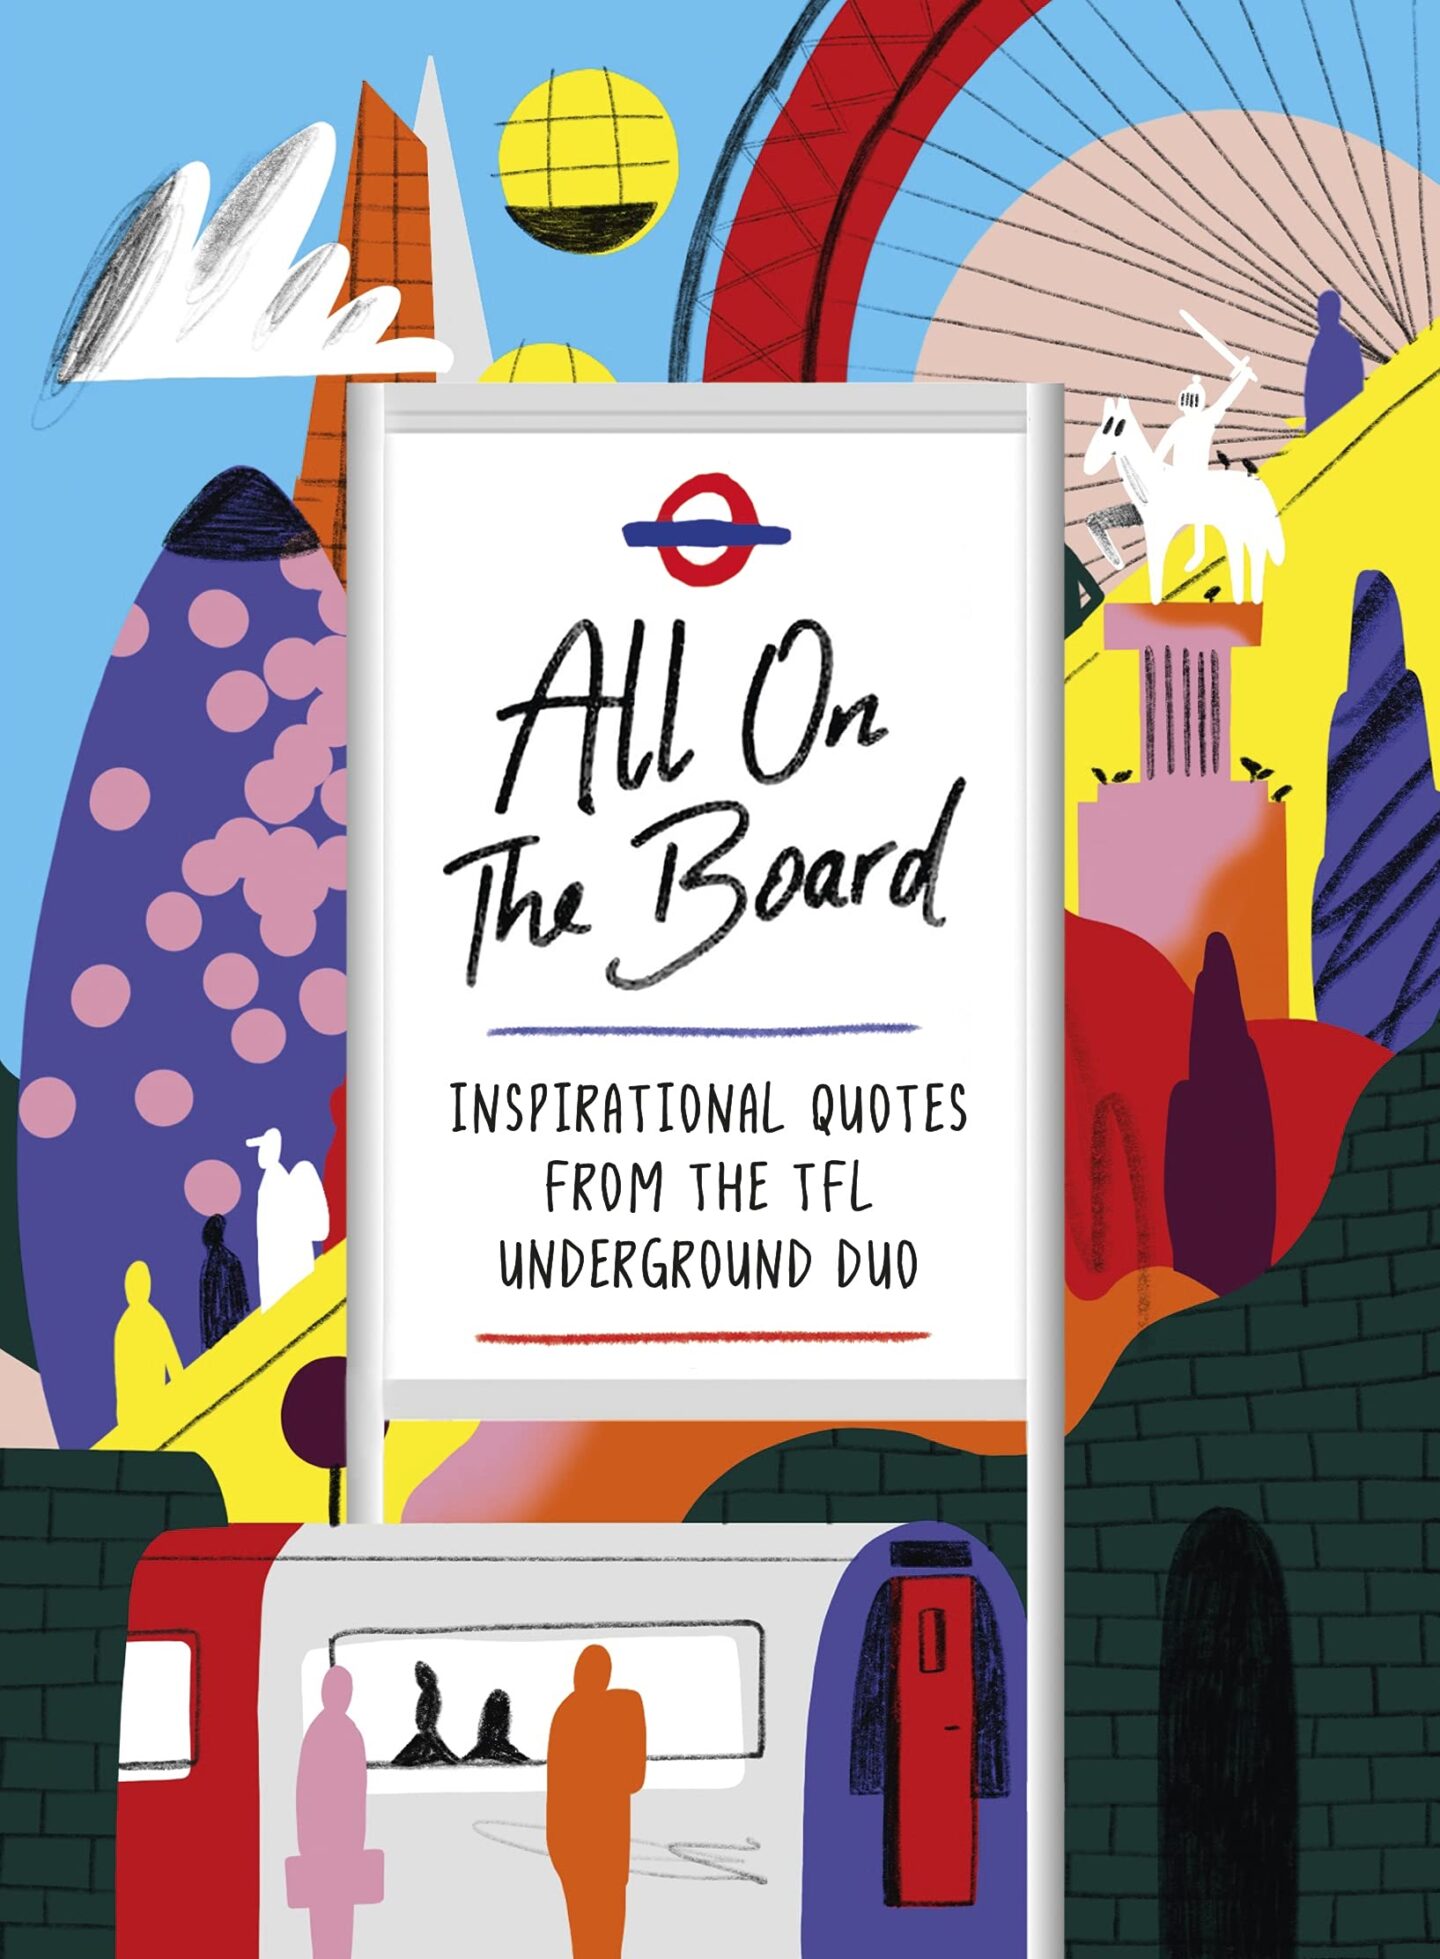 Colourfull illustrion done for All on Board; it is a one of the quirkiest gift ideas for london lovers, who love reading inspirational quotes from London Underground travellers.